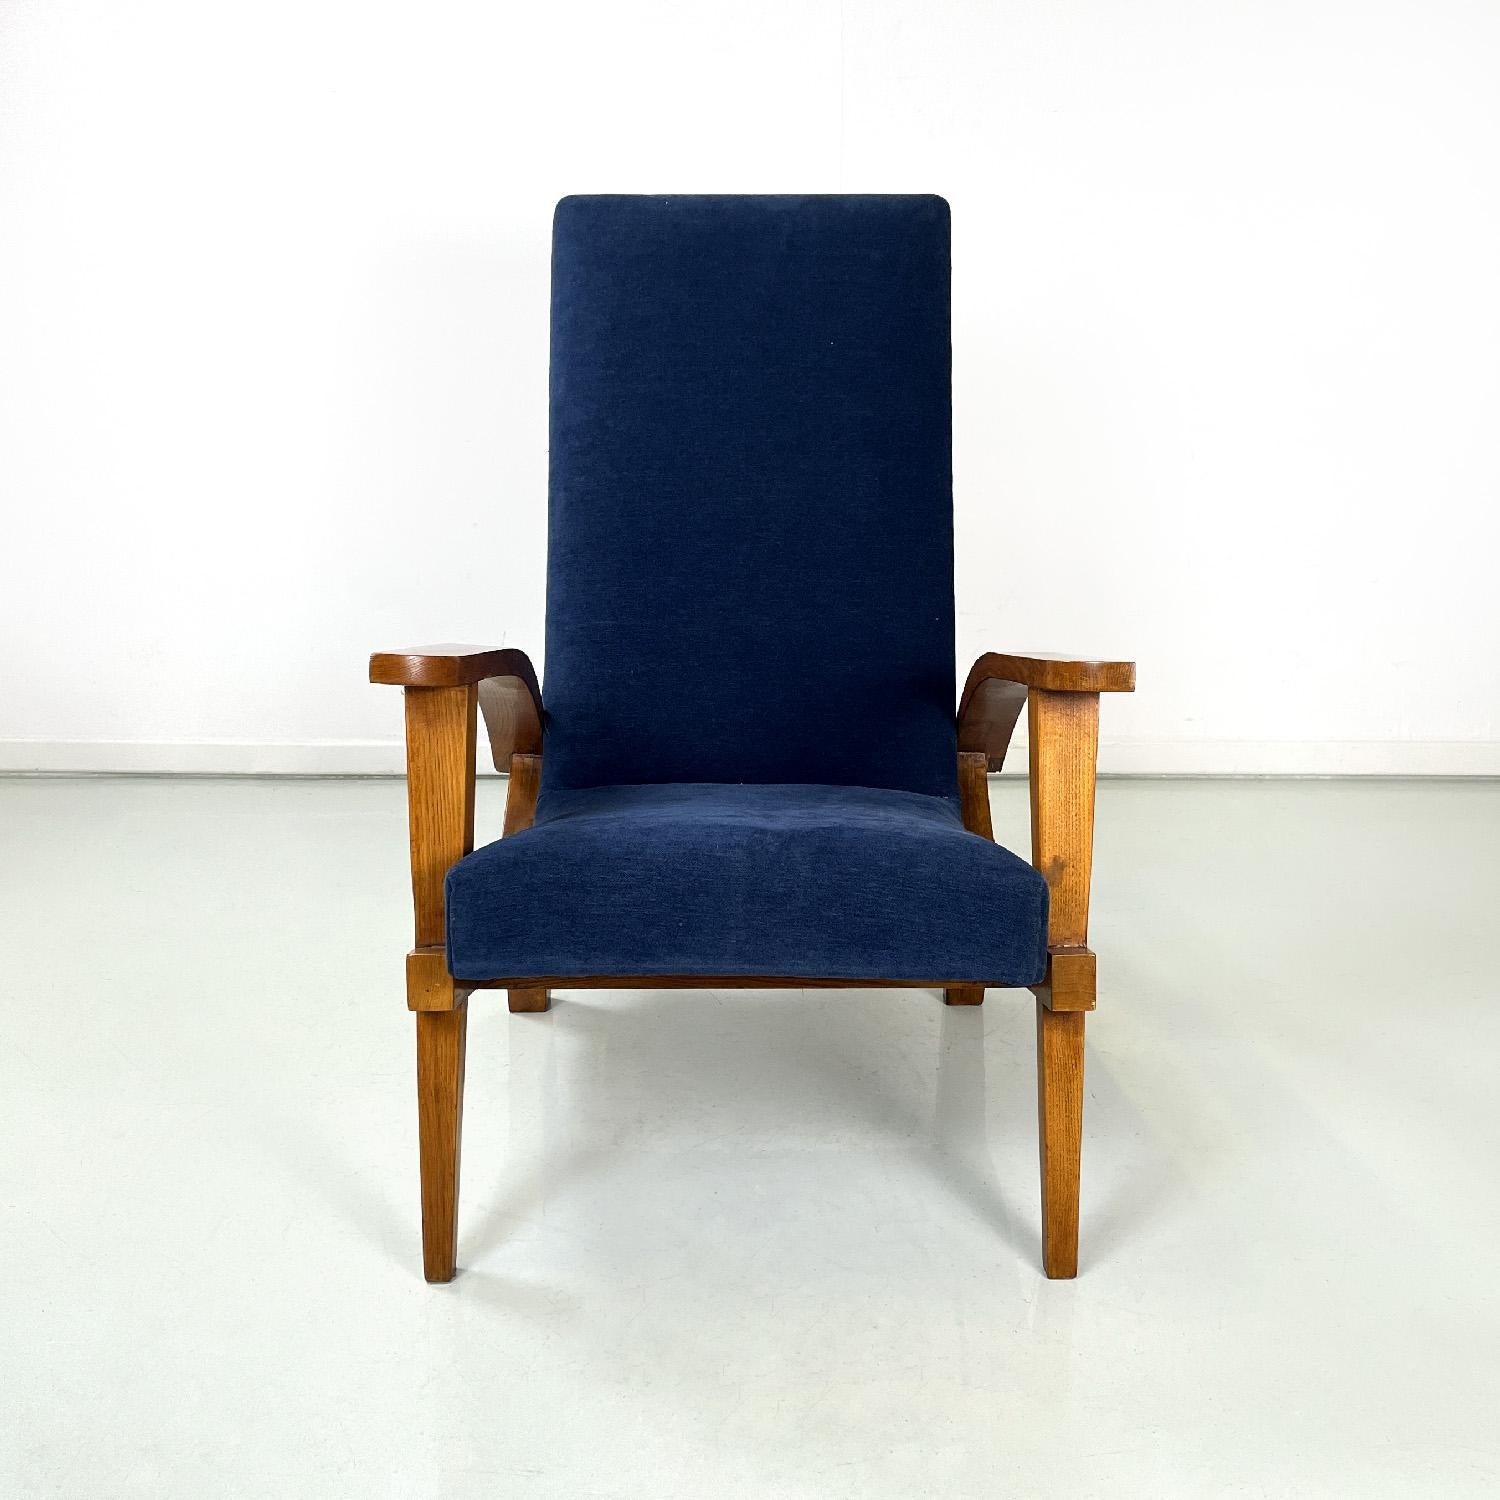 Italian mid-century modern wood and blue fabric armchairs, 1950s In Good Condition For Sale In MIlano, IT